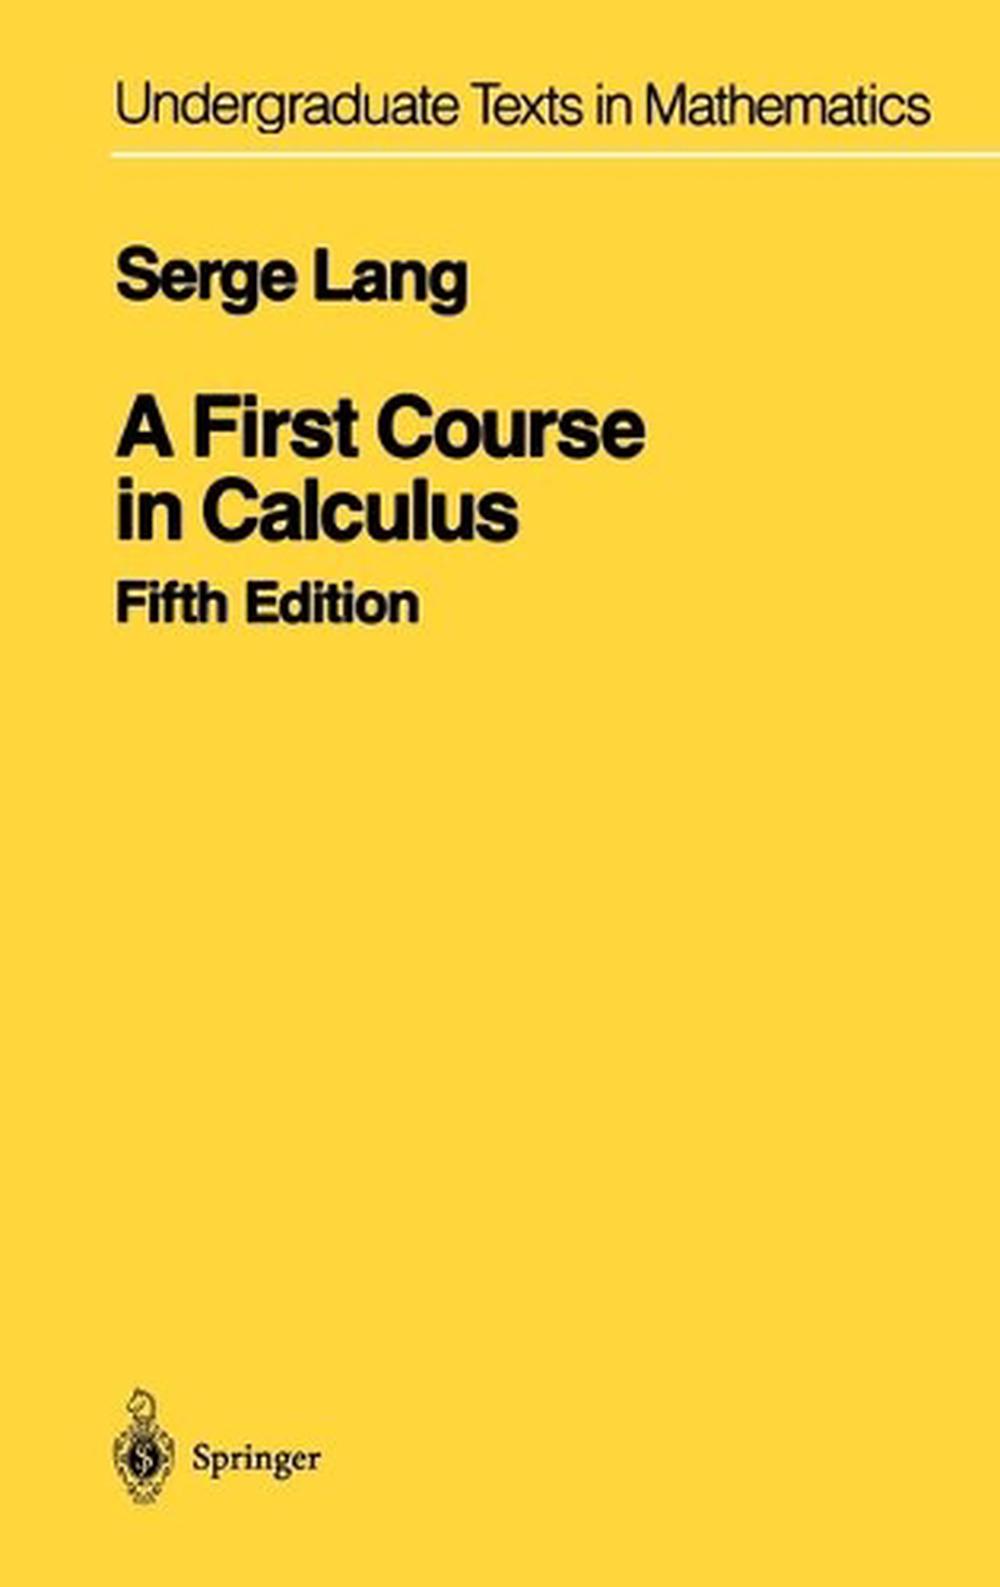 A First Course in Calculus by Serge Lang (English) Hardcover Book Free